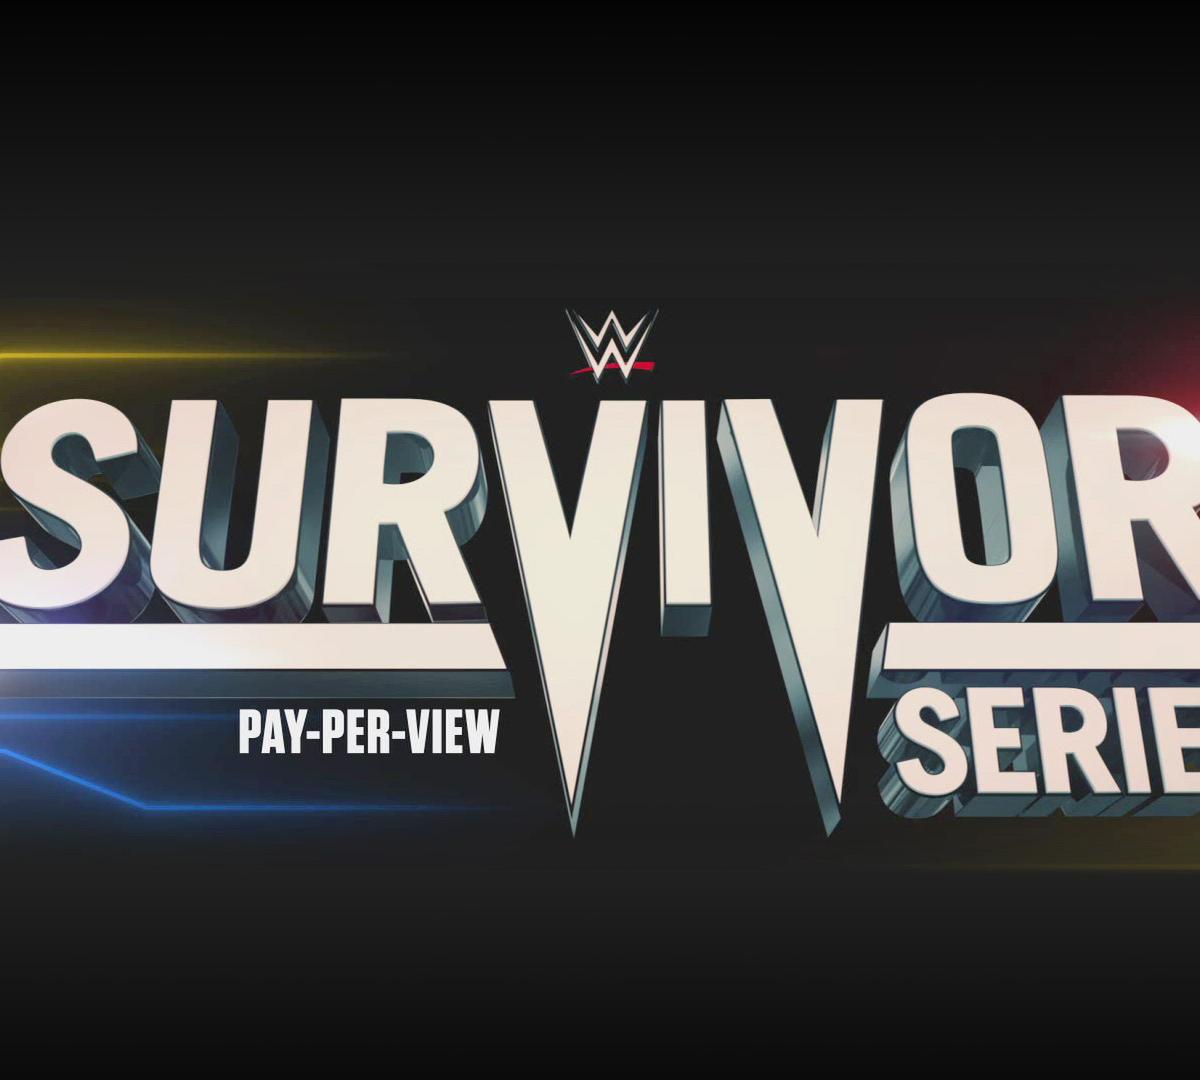 Which Mark Has the Greater Champions Entering 2020 WWE Survivor Collection?